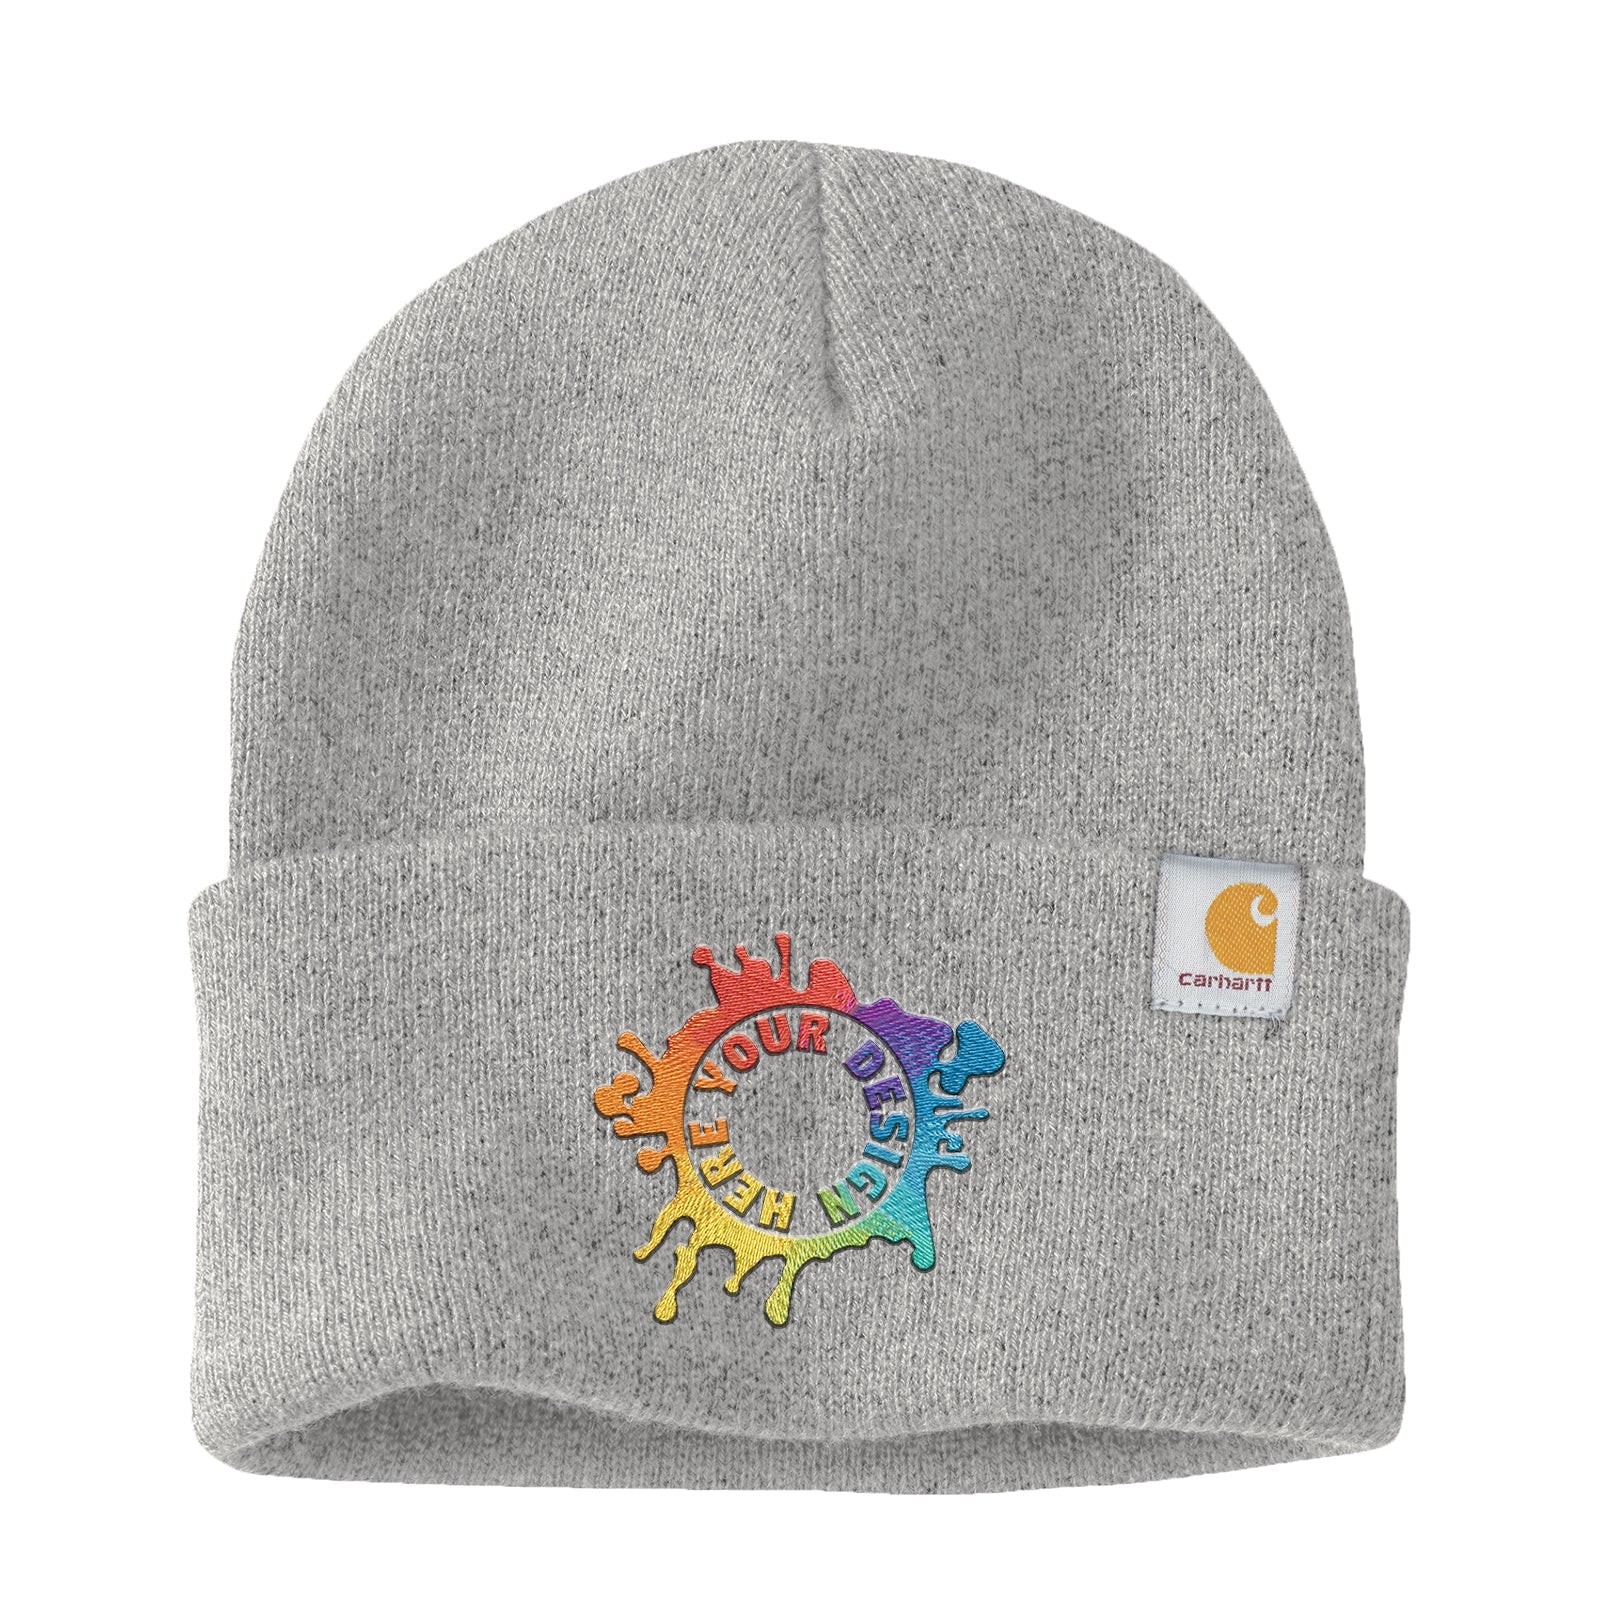 Carhartt® Watch Cap 2.0 Embroidery - BEST SELLING BEANIE - Mato & Hash